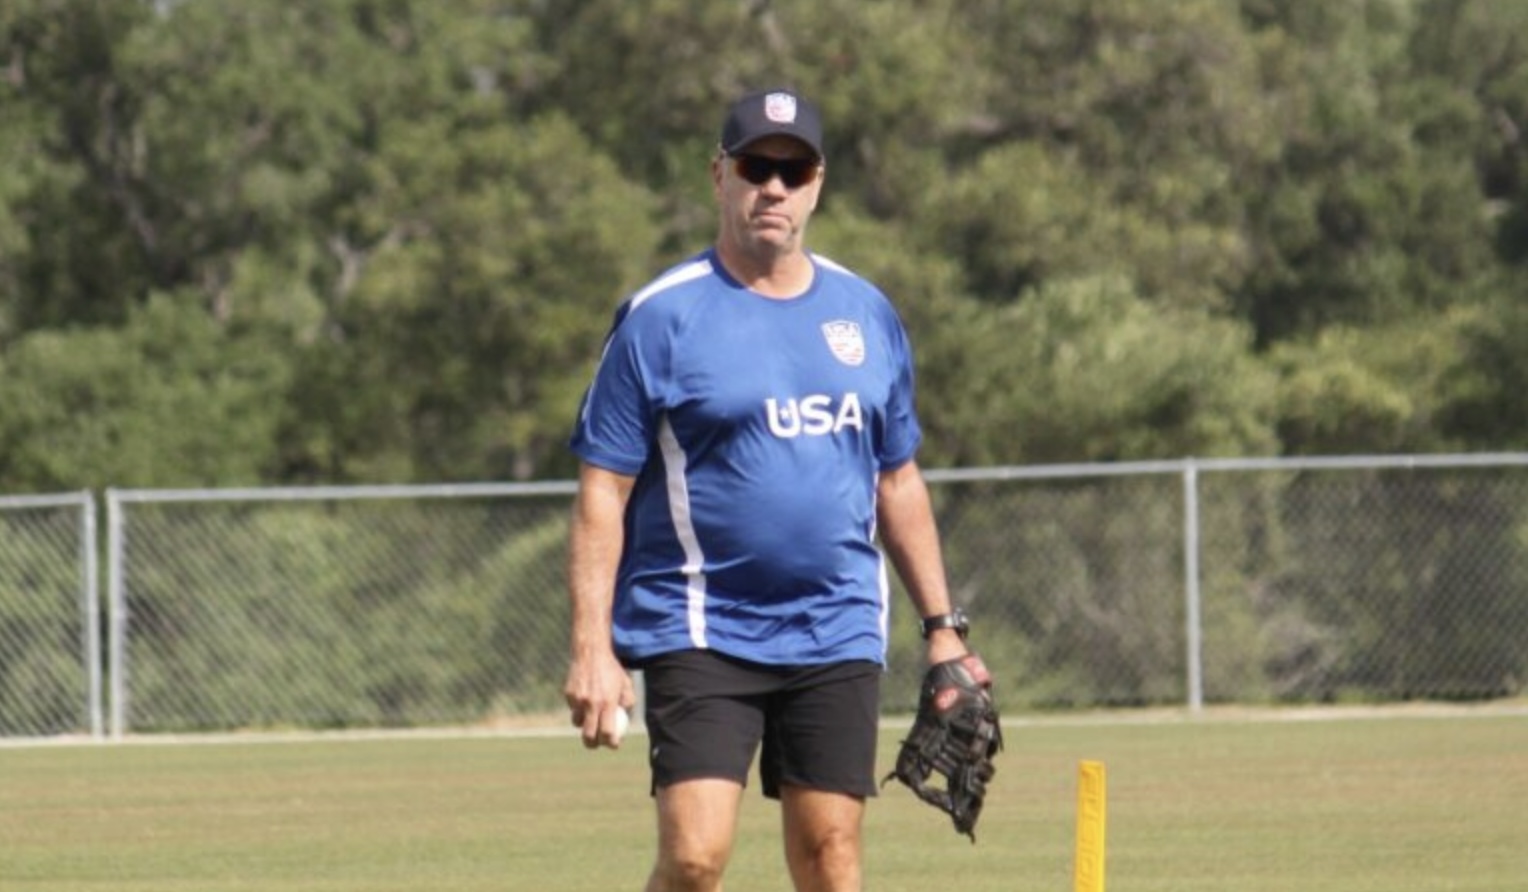 Aussie to coach USA at T20 World Cup